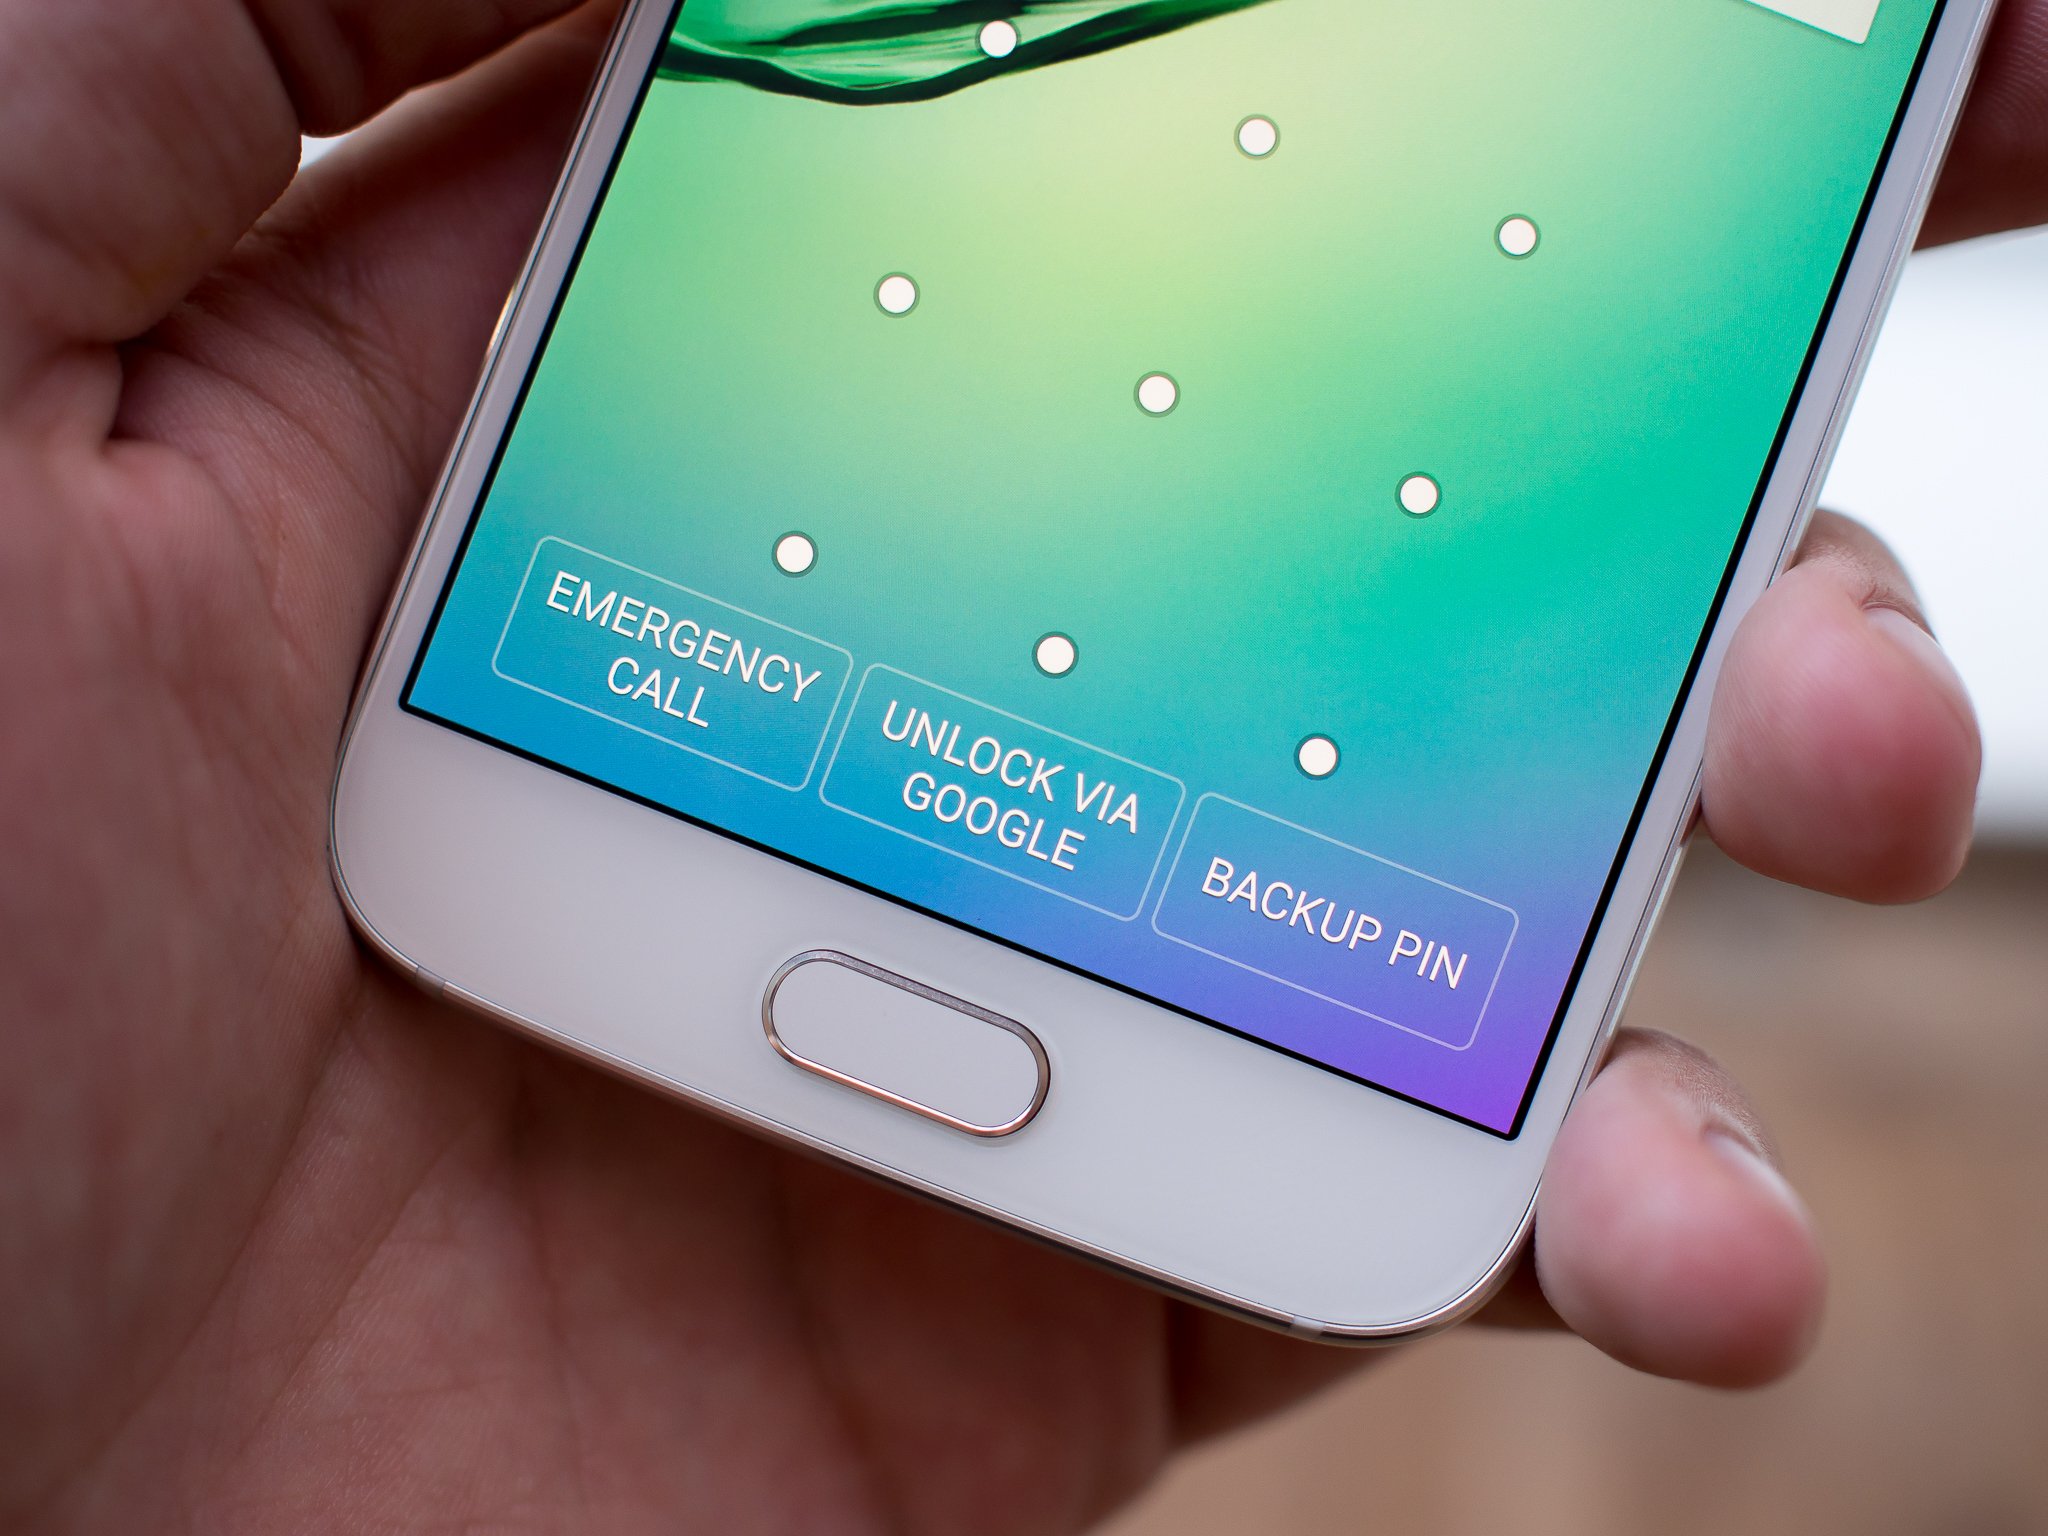 What to do if you your Samsung Galaxy S6 lock